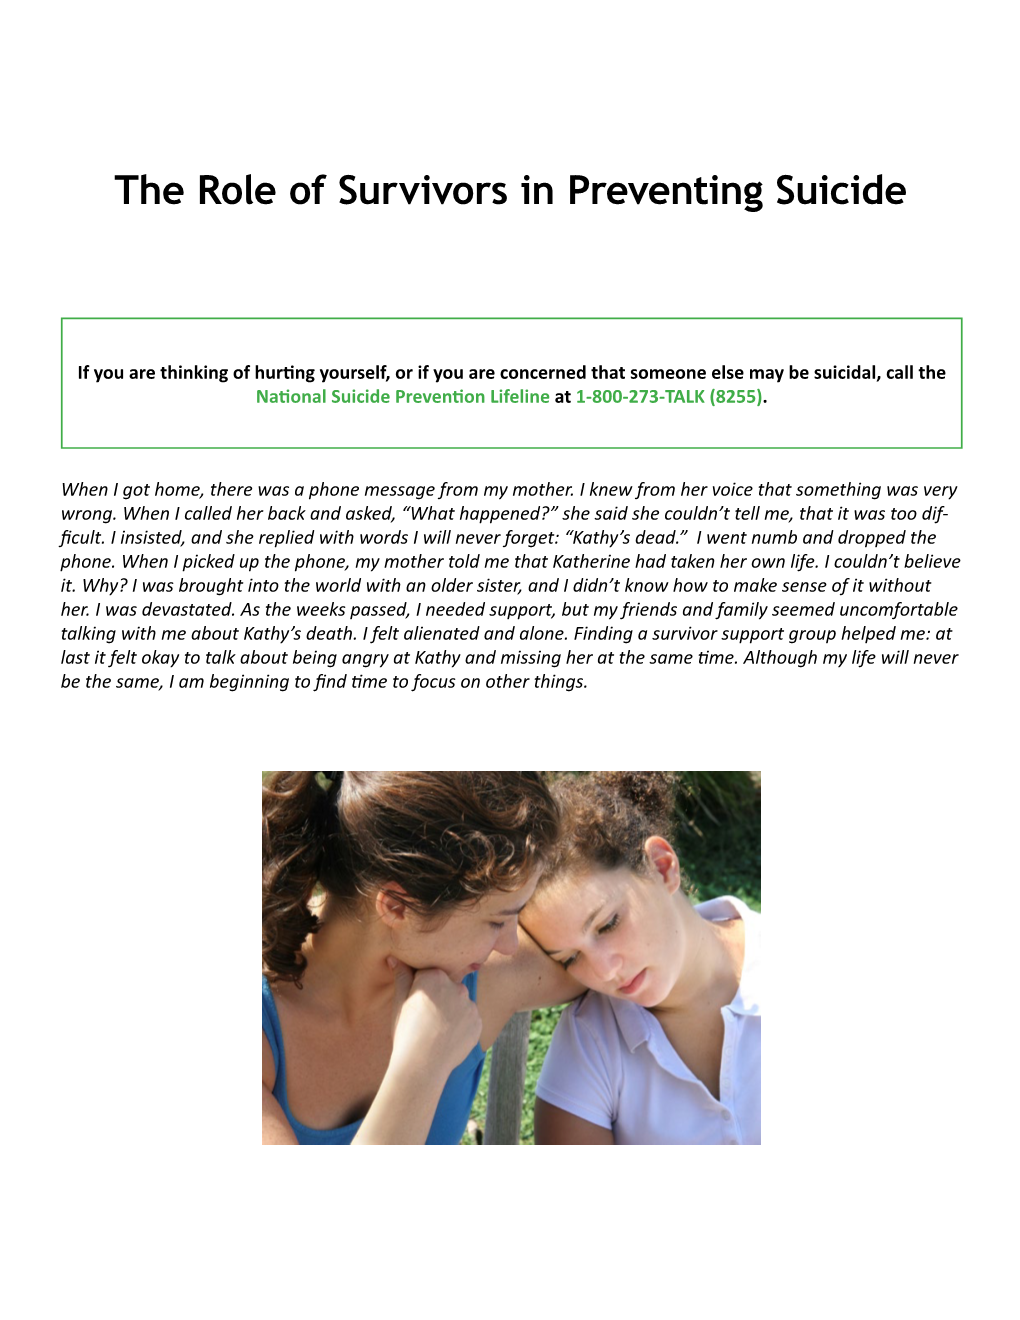 The Role of Survivors in Preventing Suicide